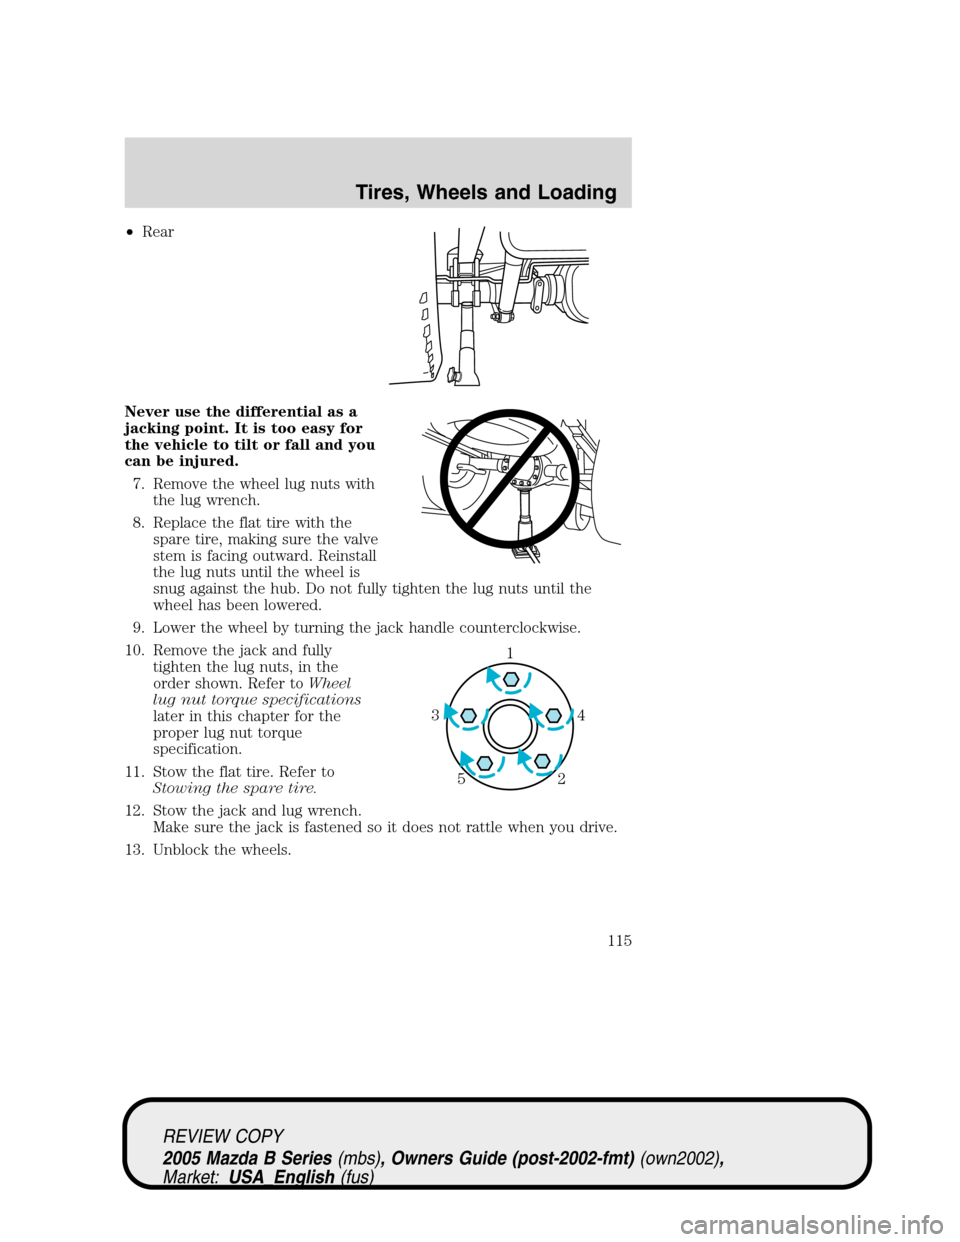 MAZDA MODEL B2300 TRUCK 2005  Owners Manual (in English) •Rear
Never use the differential as a
jacking point. It is too easy for
the vehicle to tilt or fall and you
can be injured.
7. Remove the wheel lug nuts with
the lug wrench.
8. Replace the flat tire